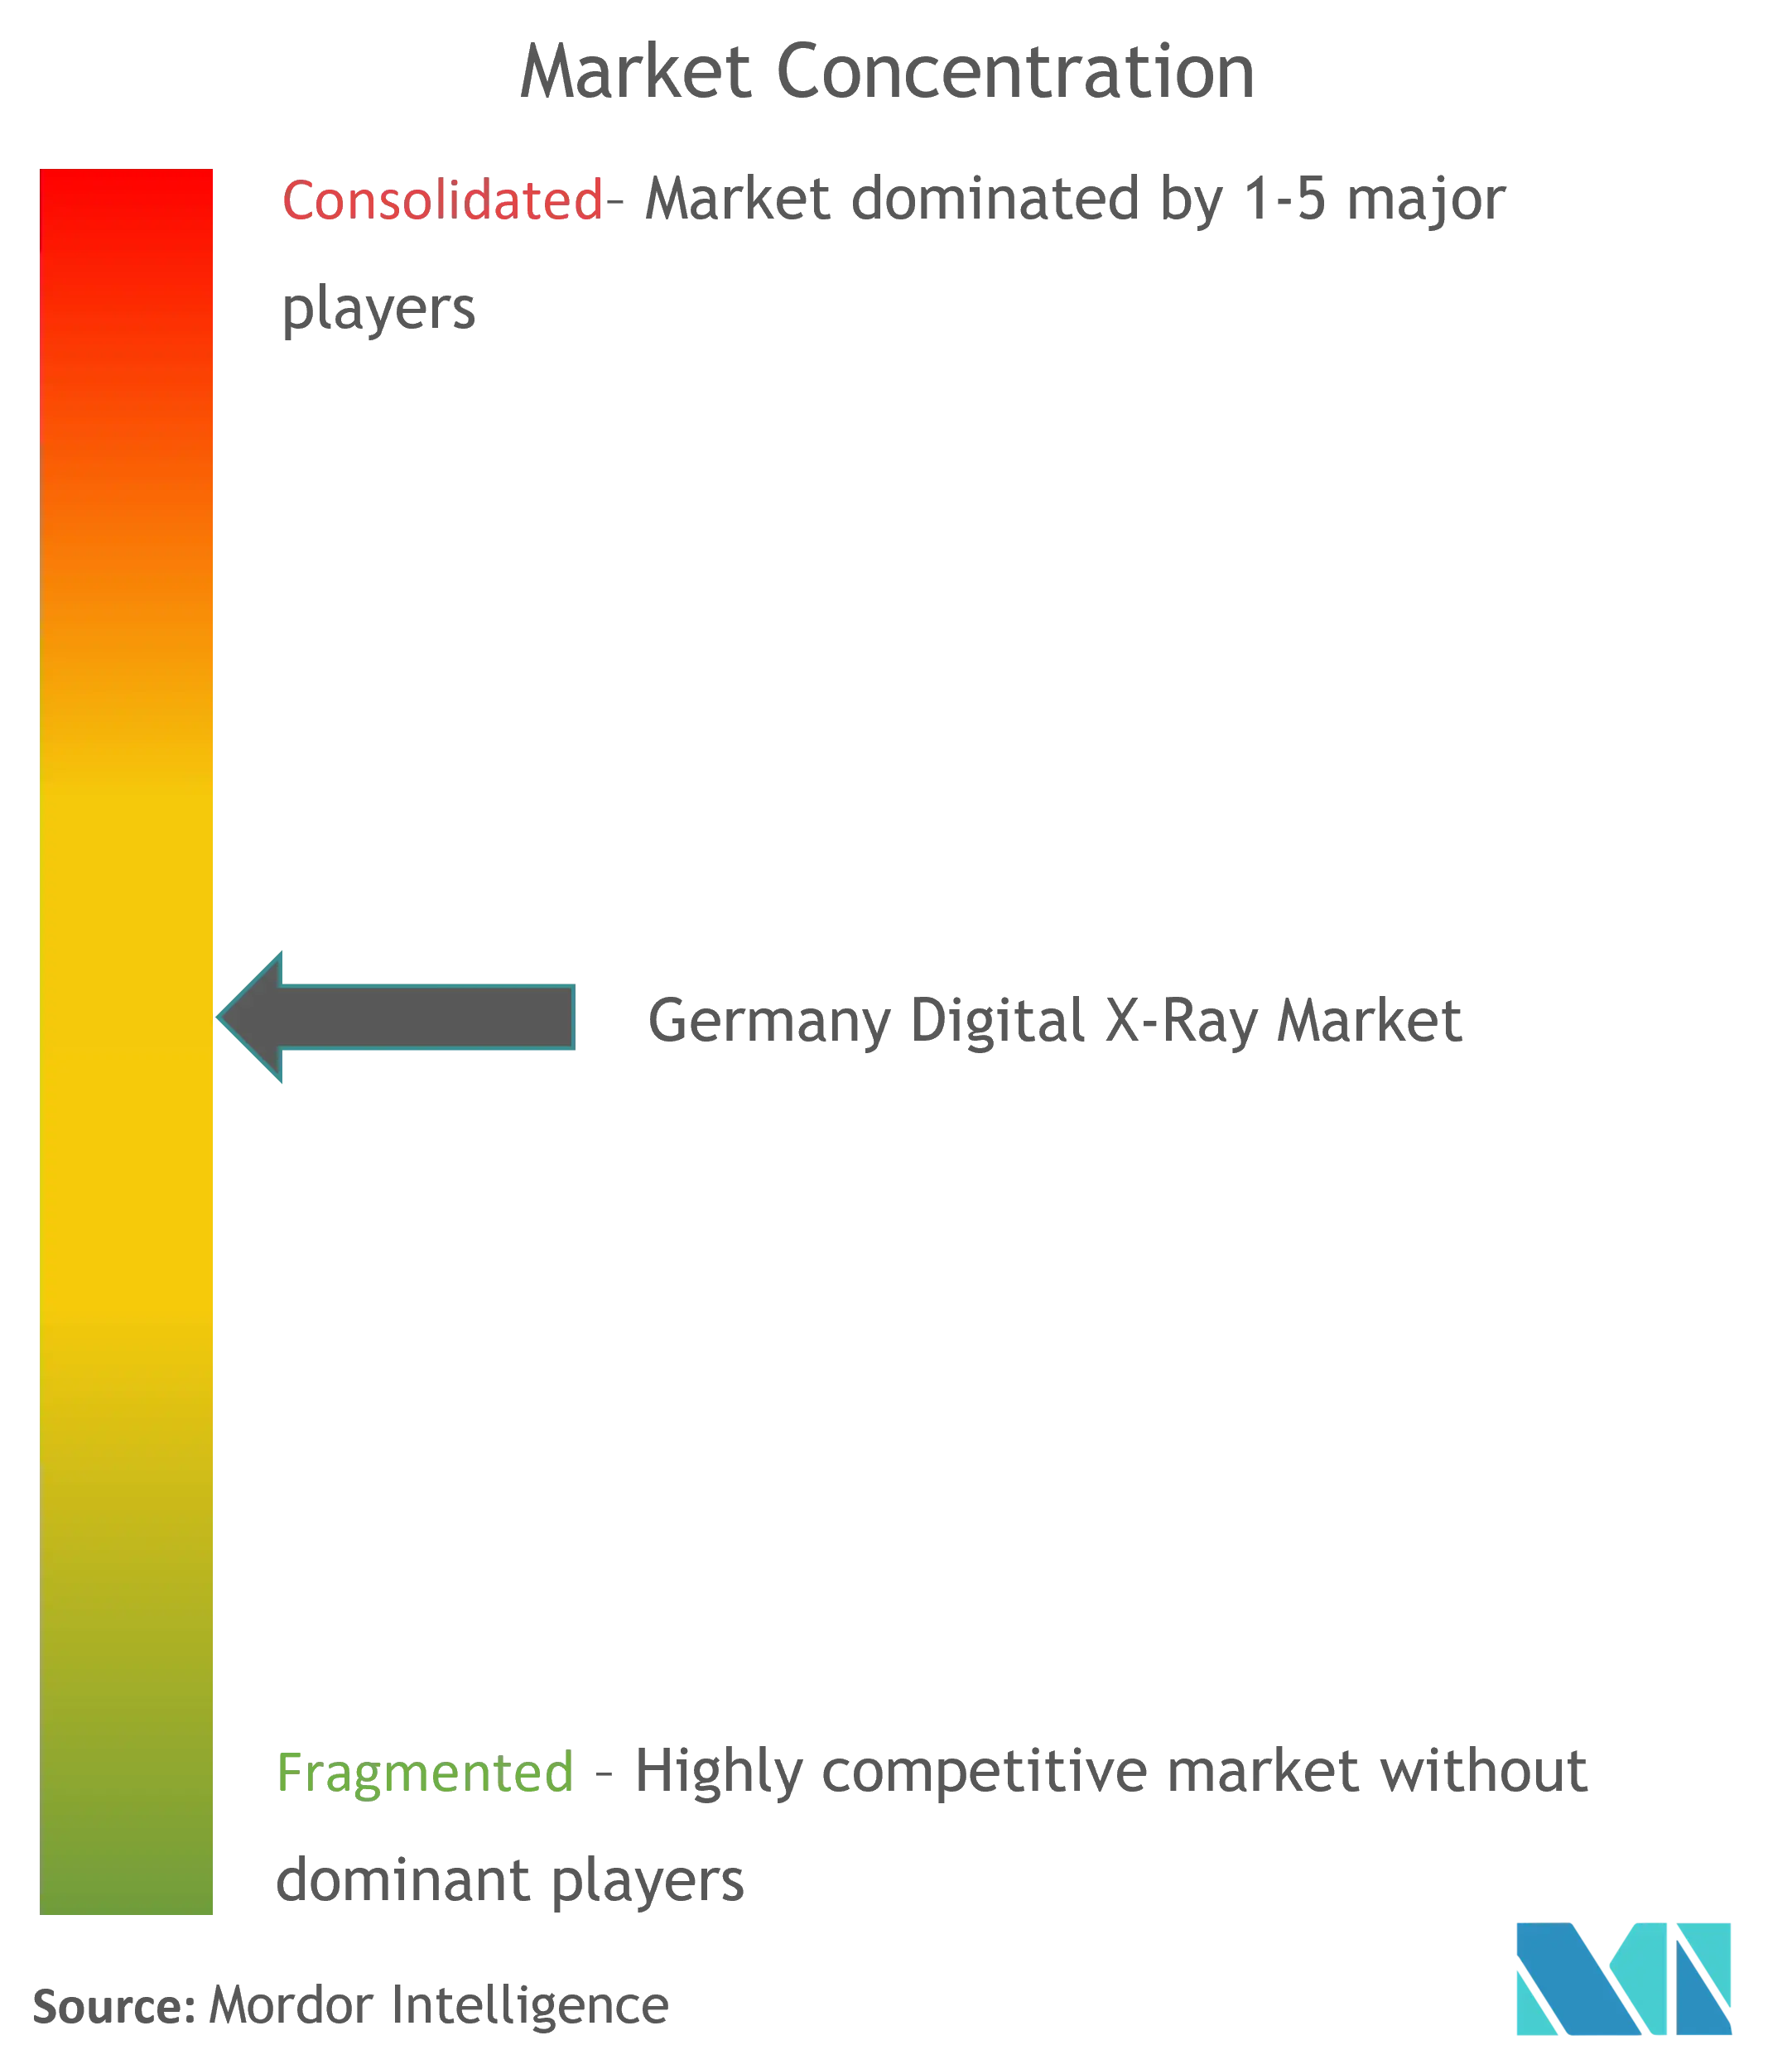 Germany Digital X-Ray Market Concentration